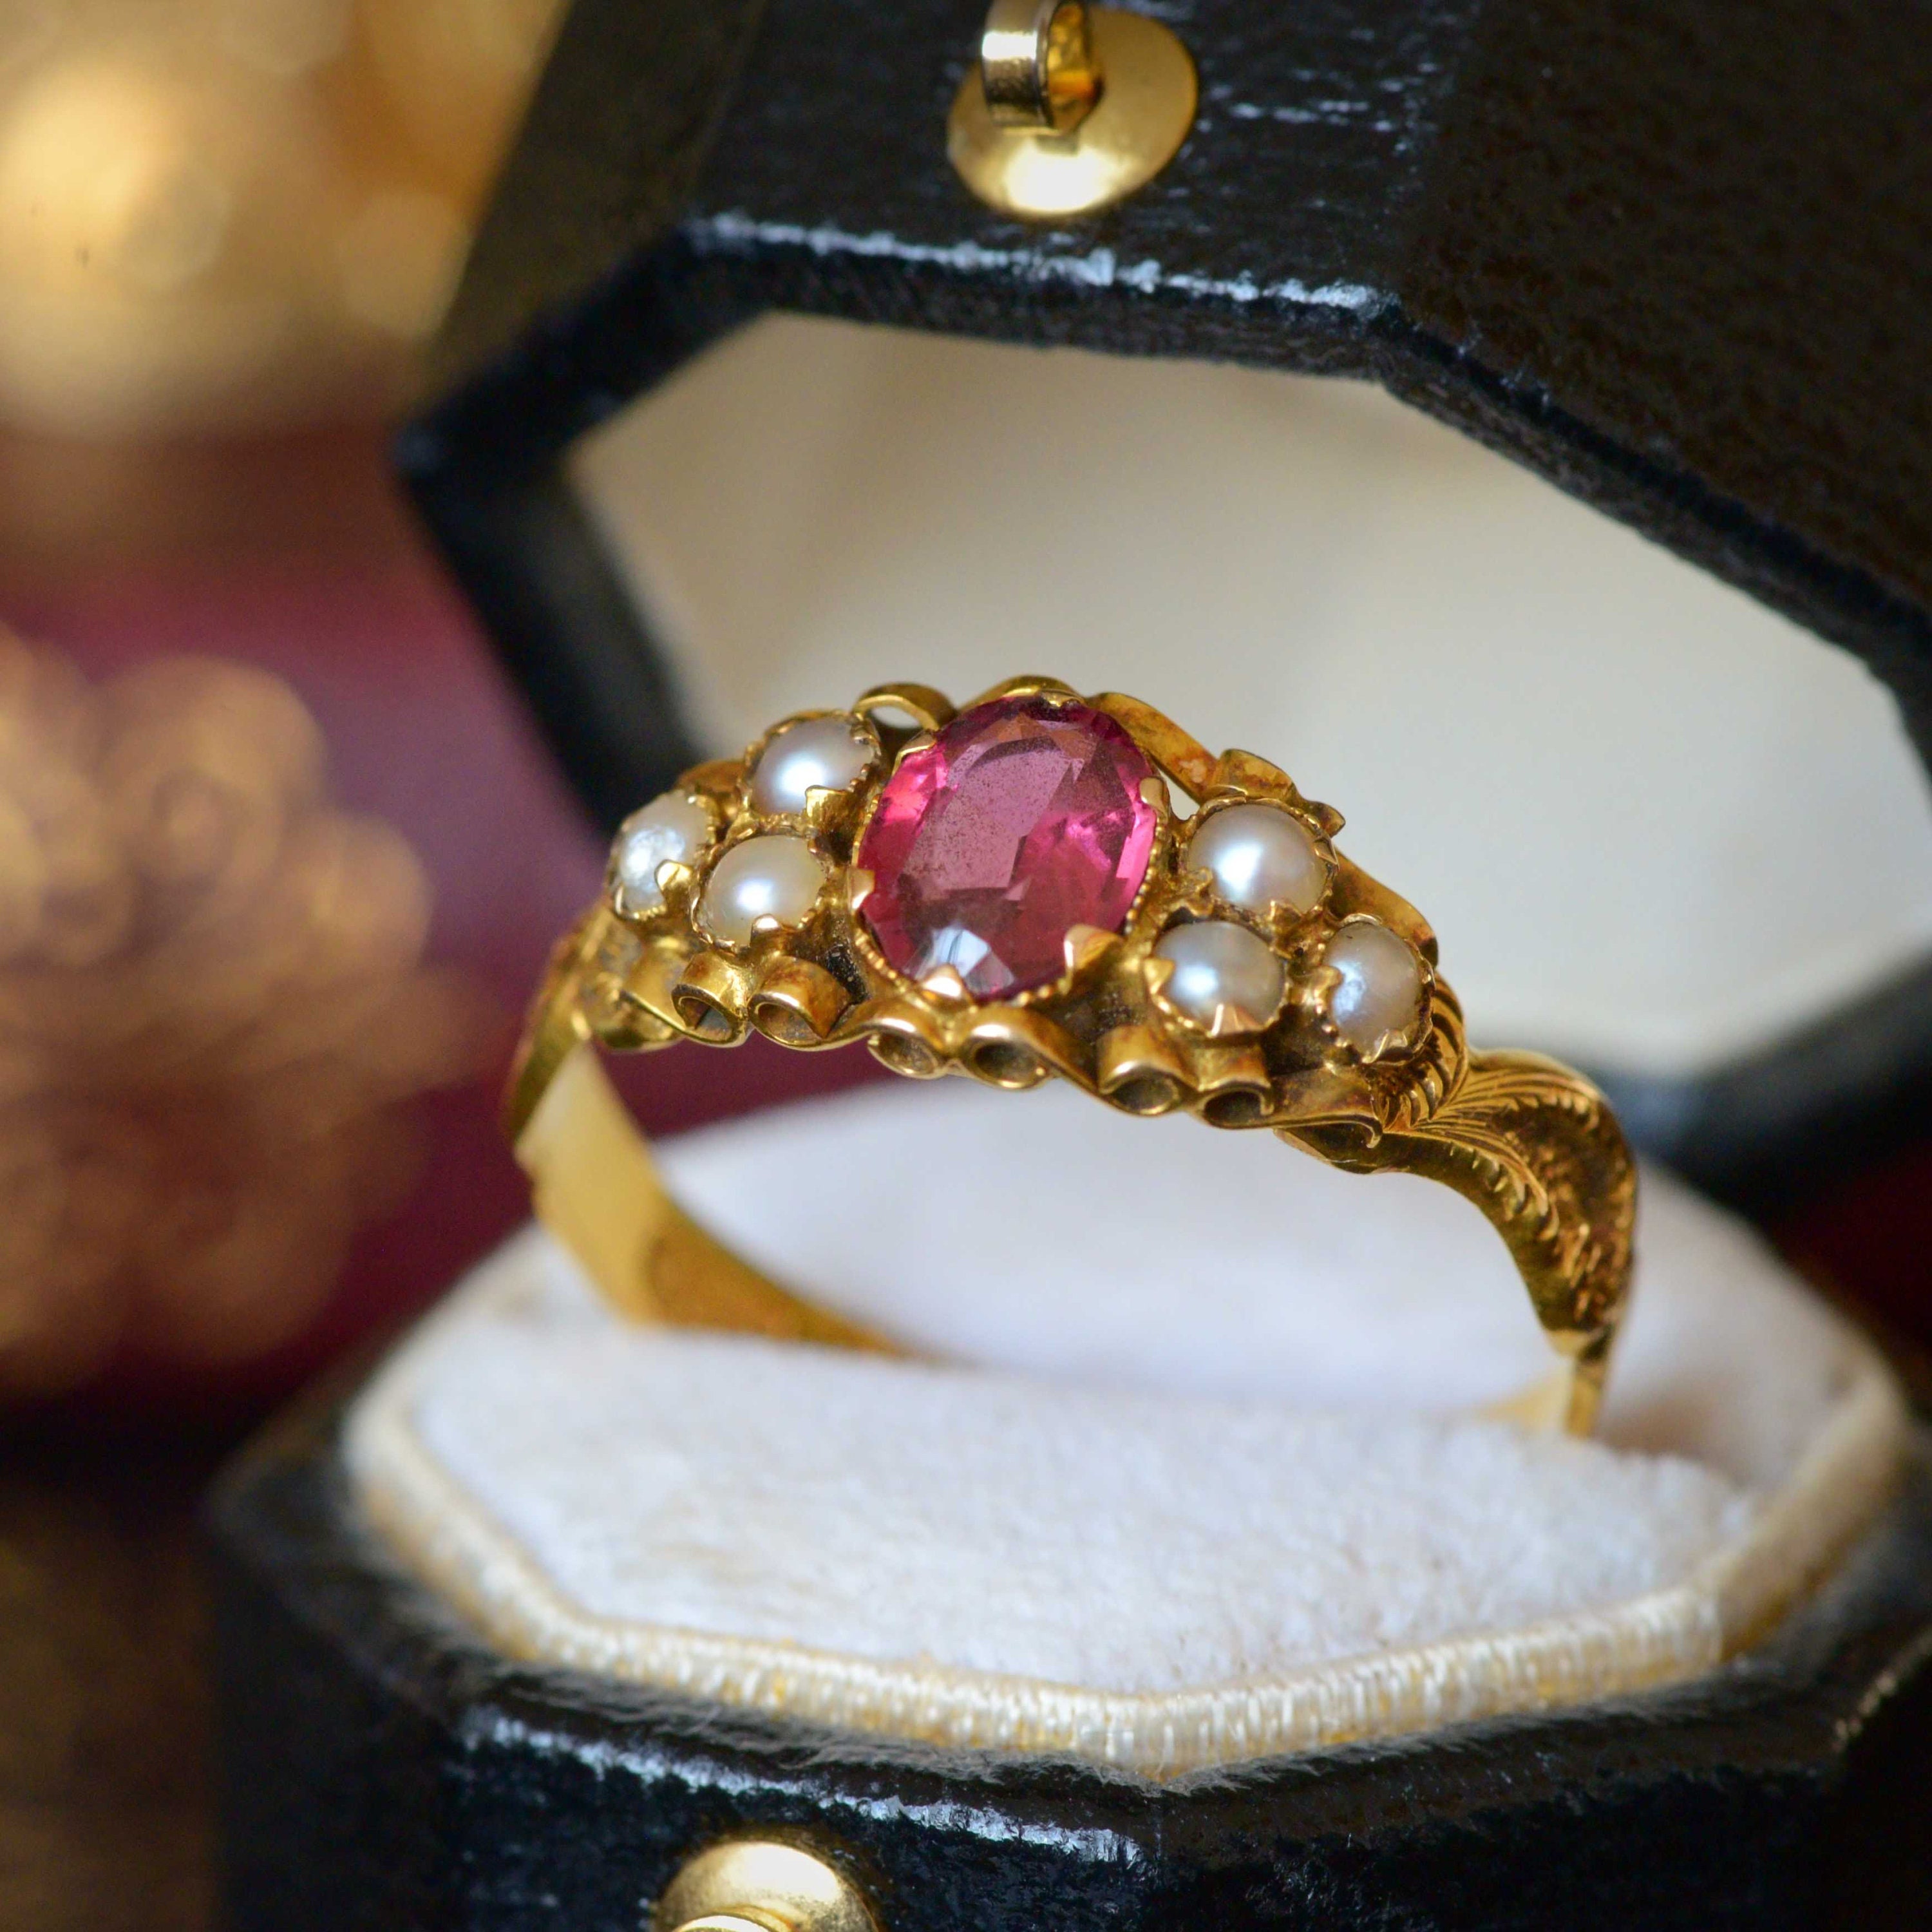 Antique Bohemian Garnet Crystal Jewelry Box Ref: 852773 - Antique Jewelry, Vintage Rings, Faberge EggsAntique Jewelry, Vintage Rings